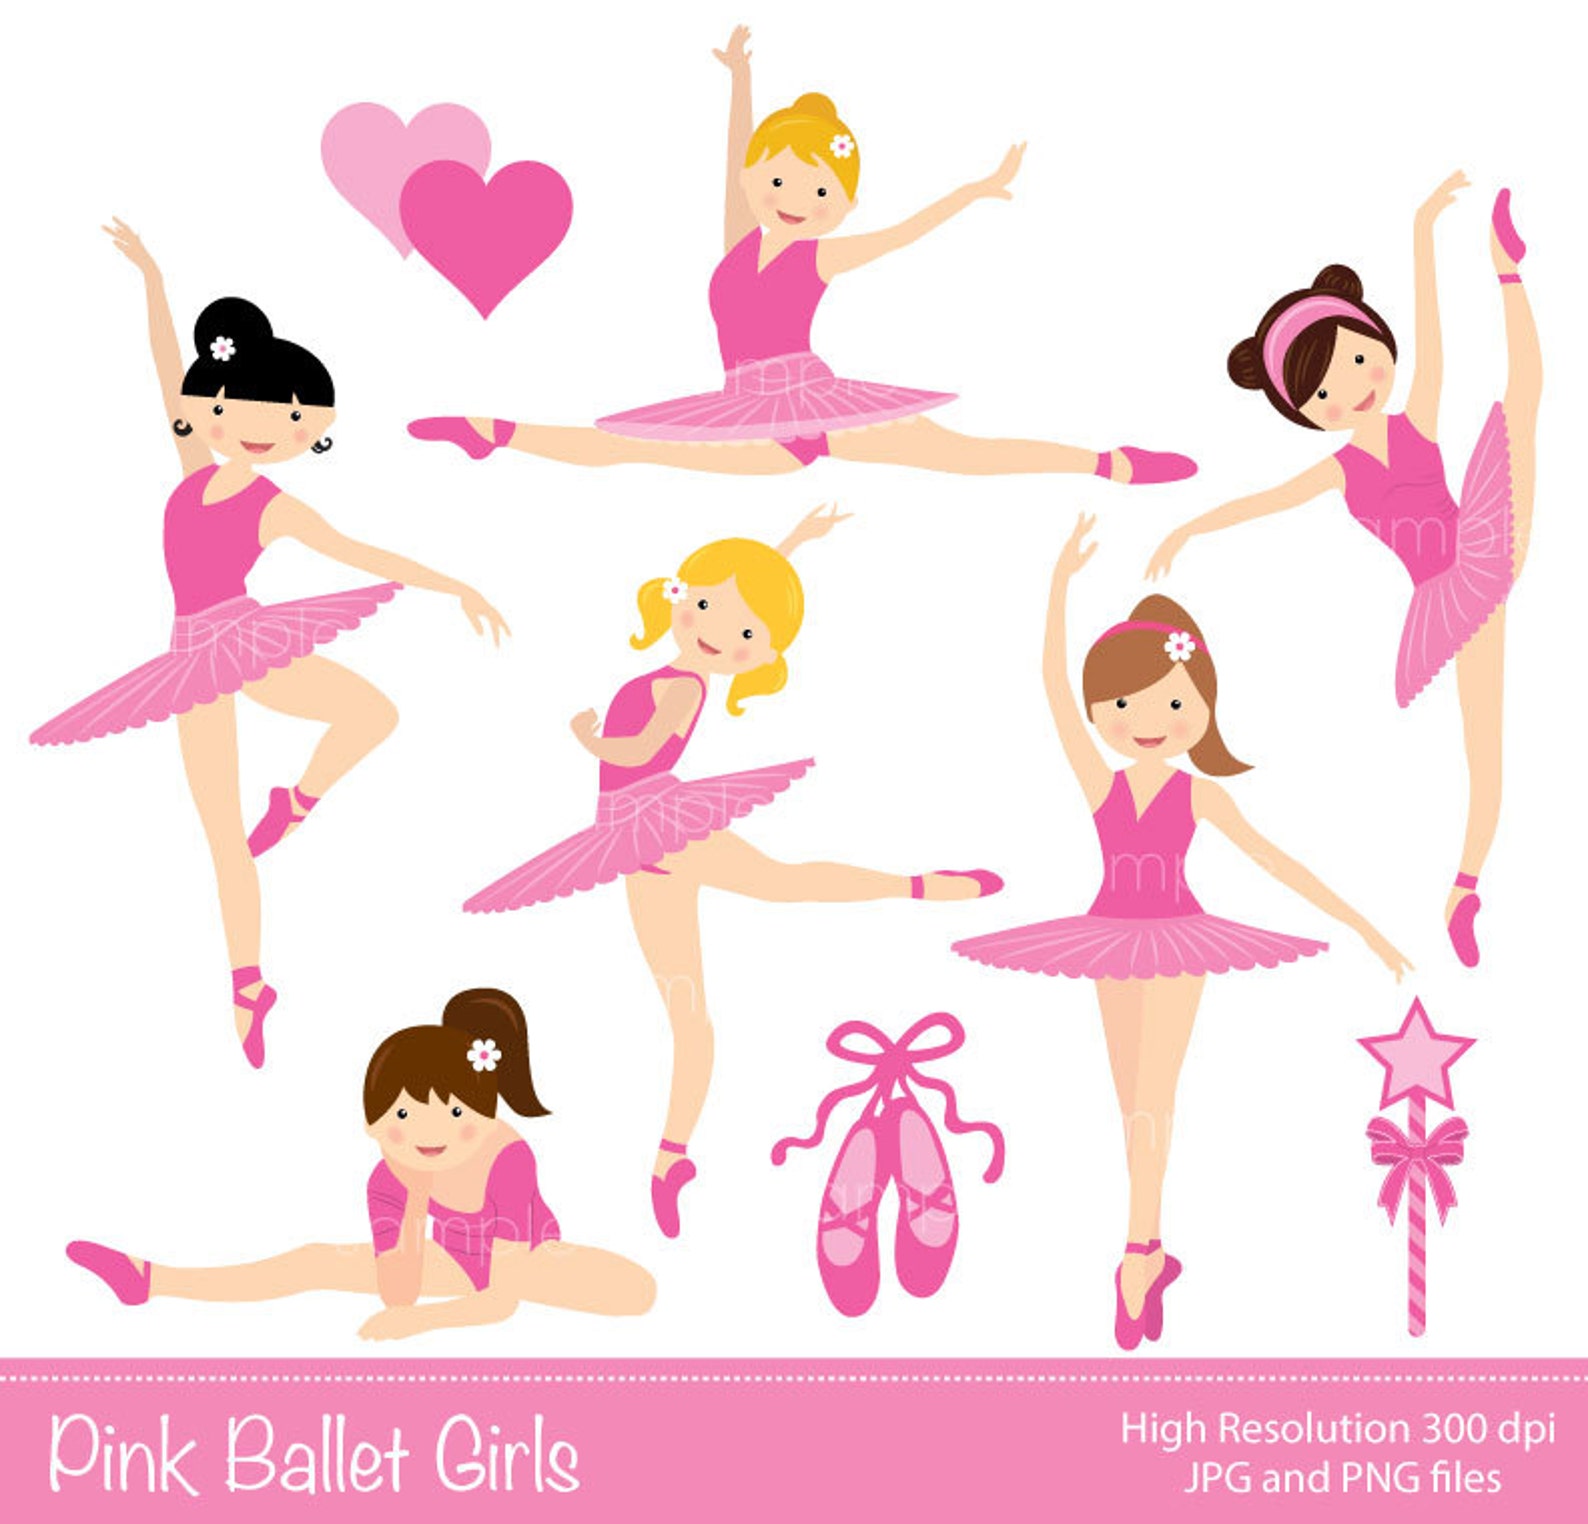 digital clipart - pink ballet girls for scrapbooking, invitations, paper crafts, cards making, only for personal use